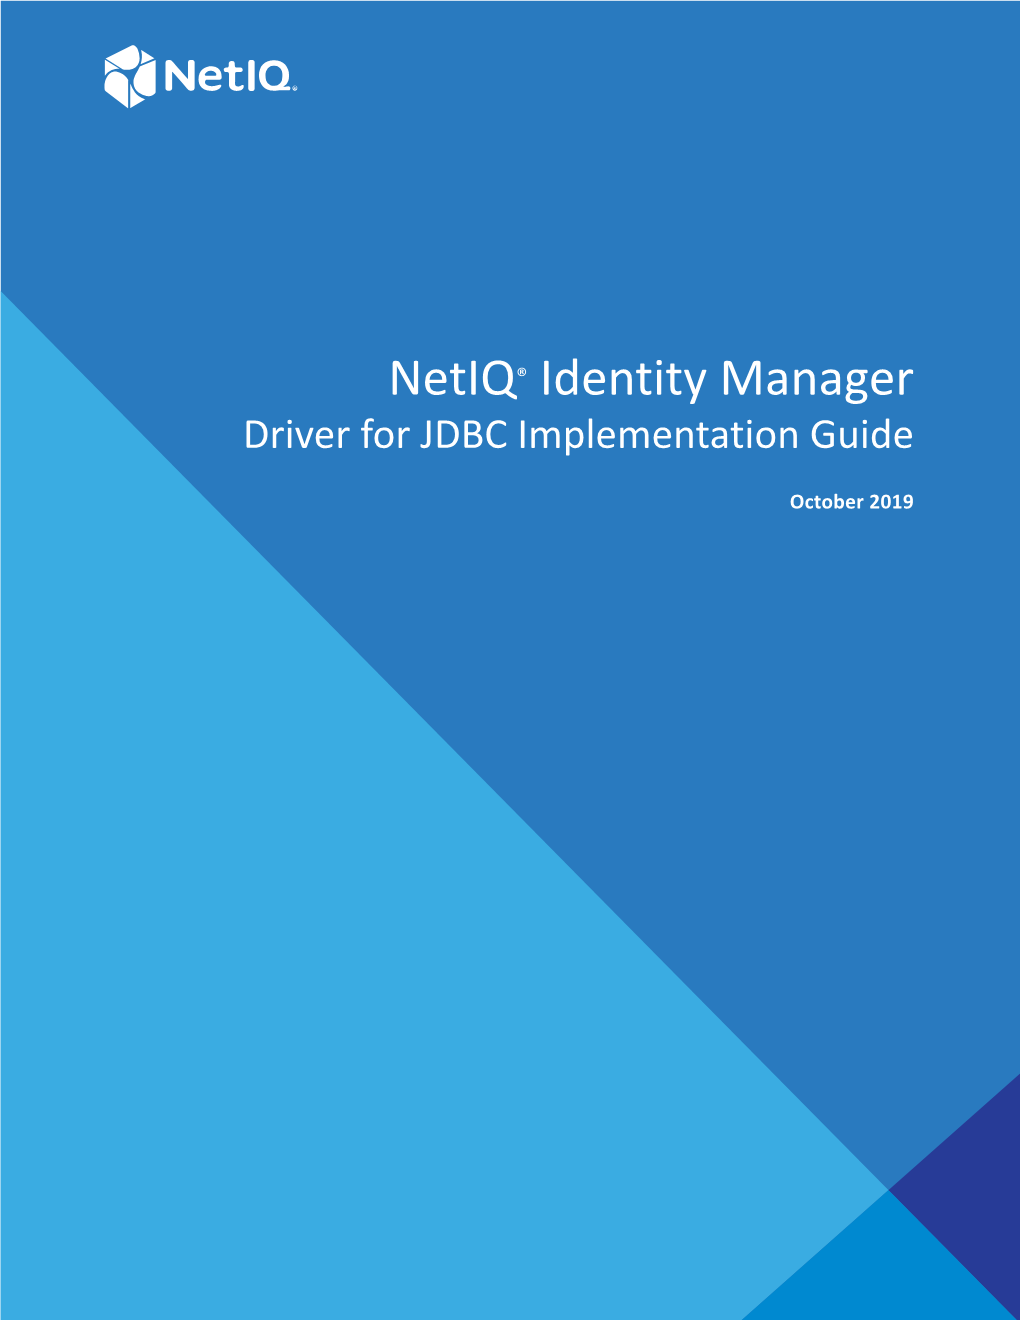 Netiq Identity Manager Driver for JDBC Fanout Implementation Guide